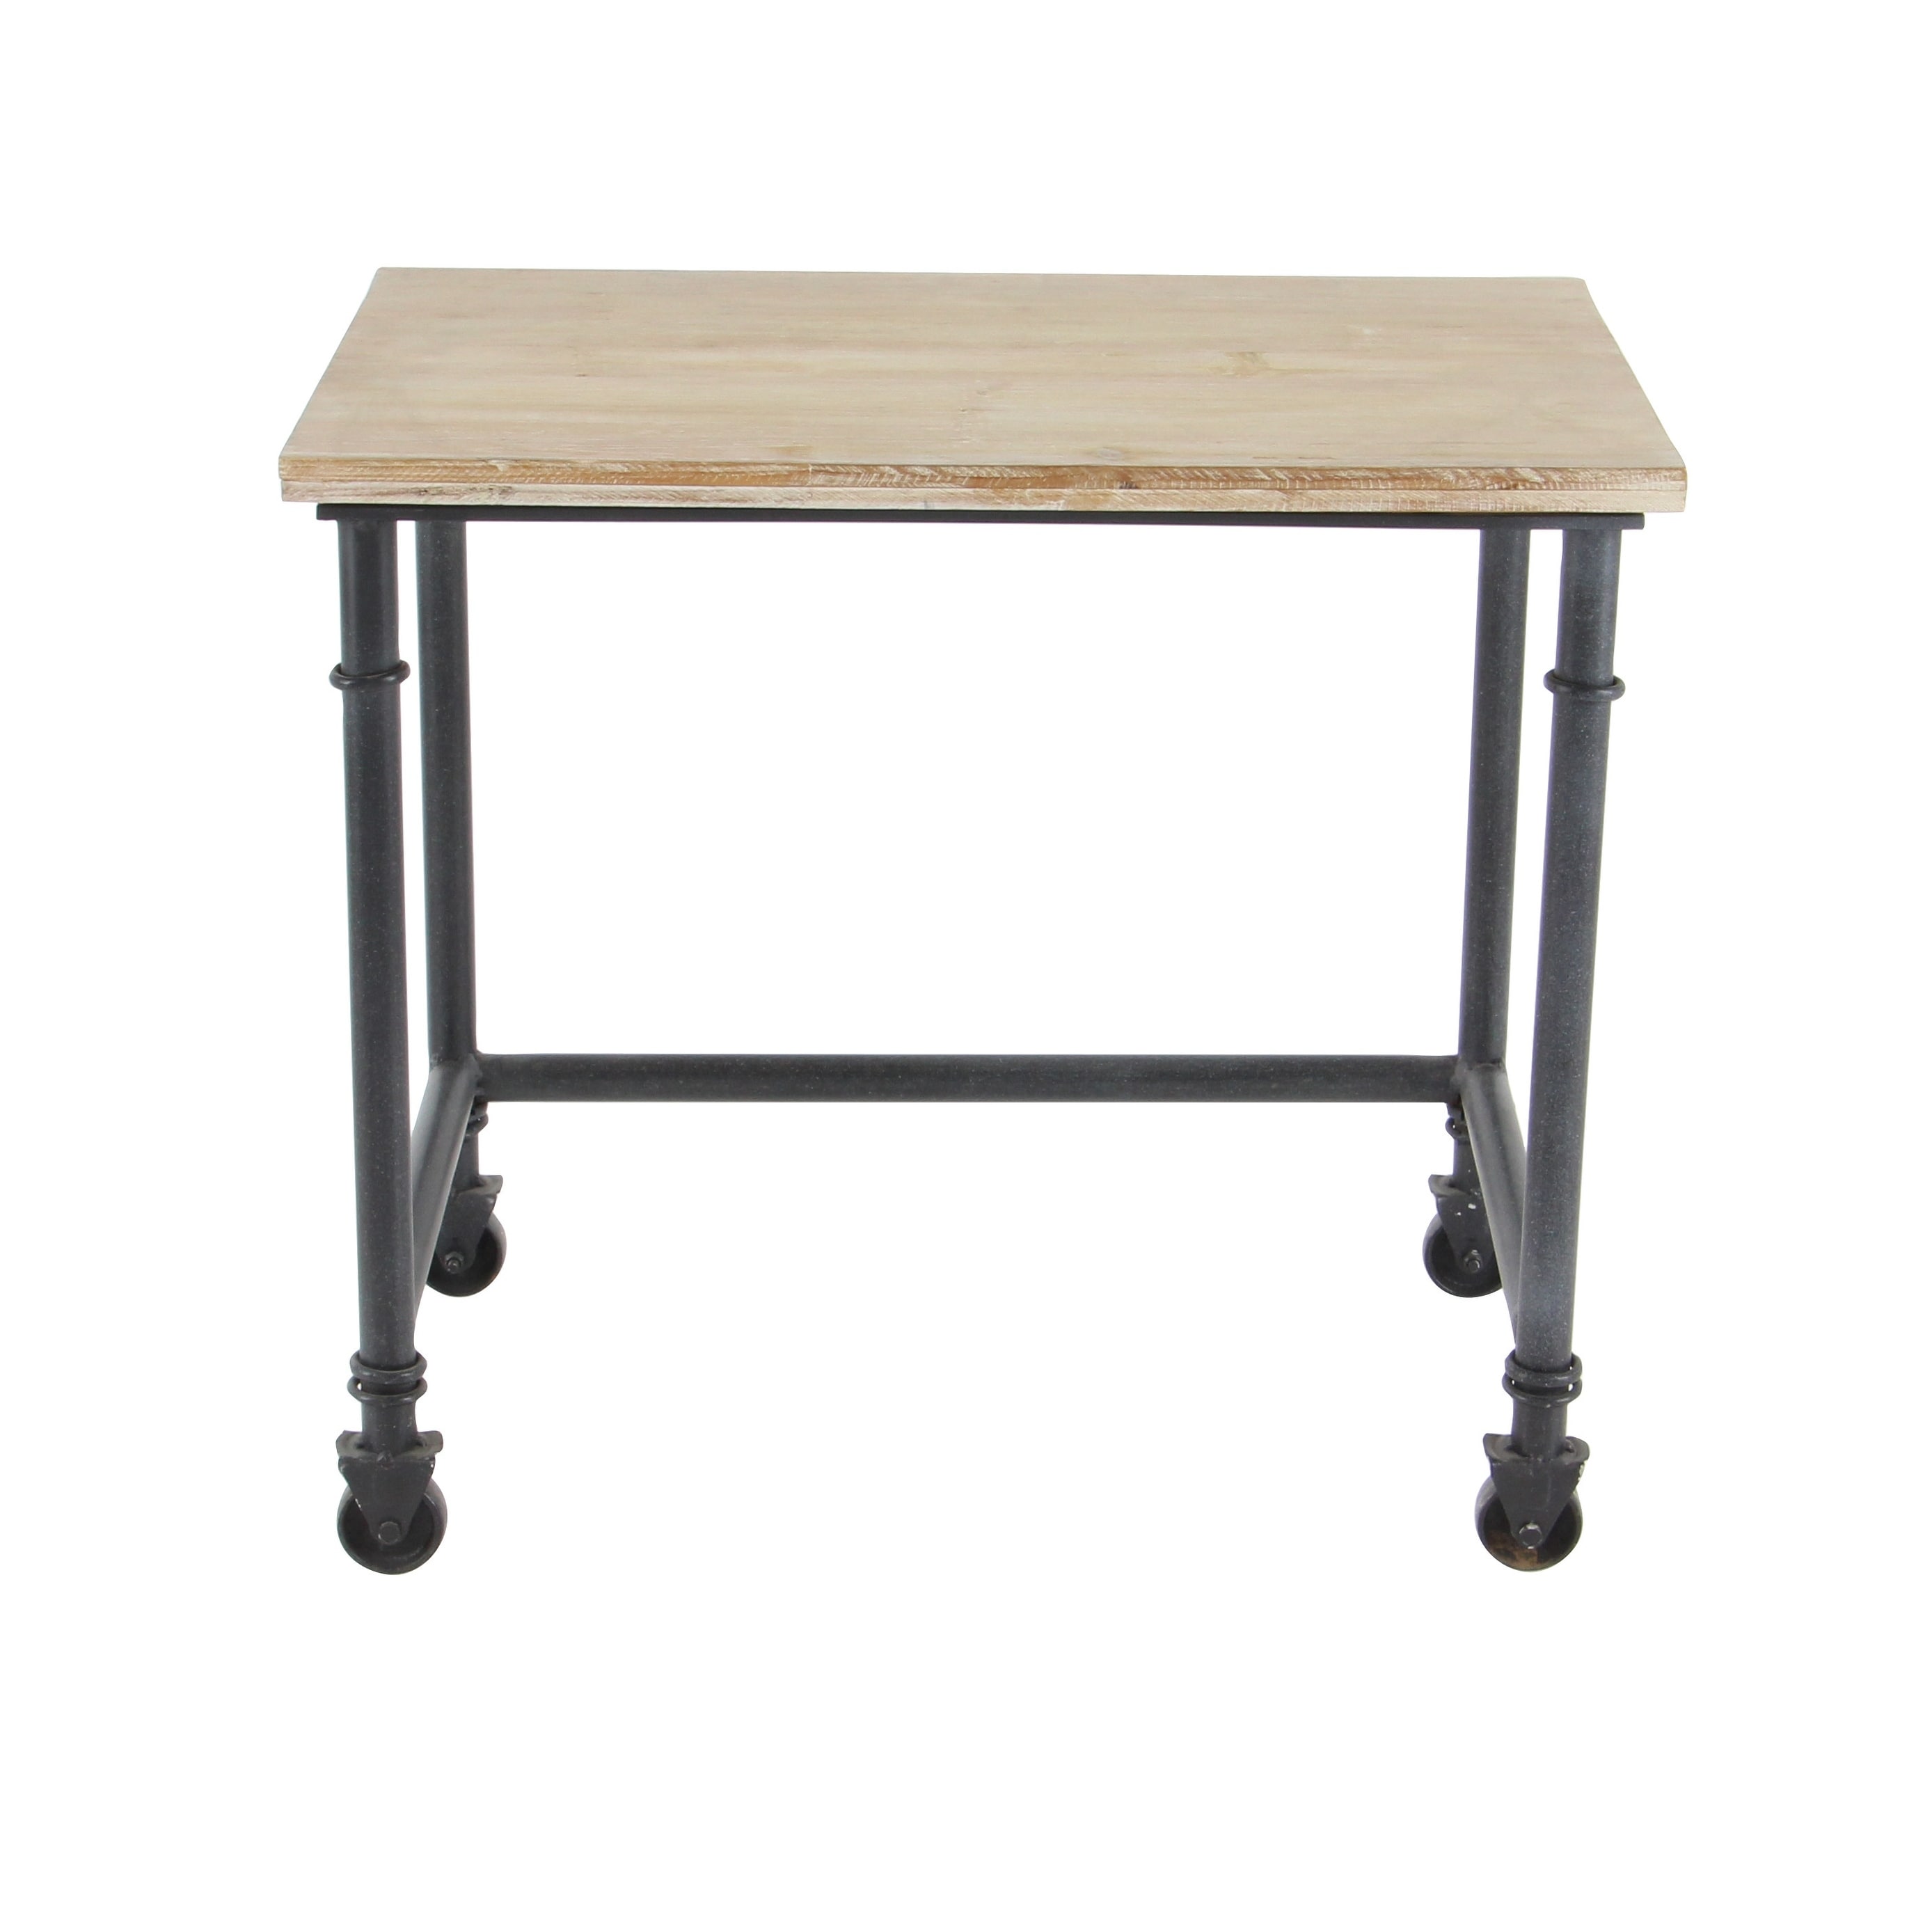 Industrial Nesting Table for Sale, Trade Furniture Supplier